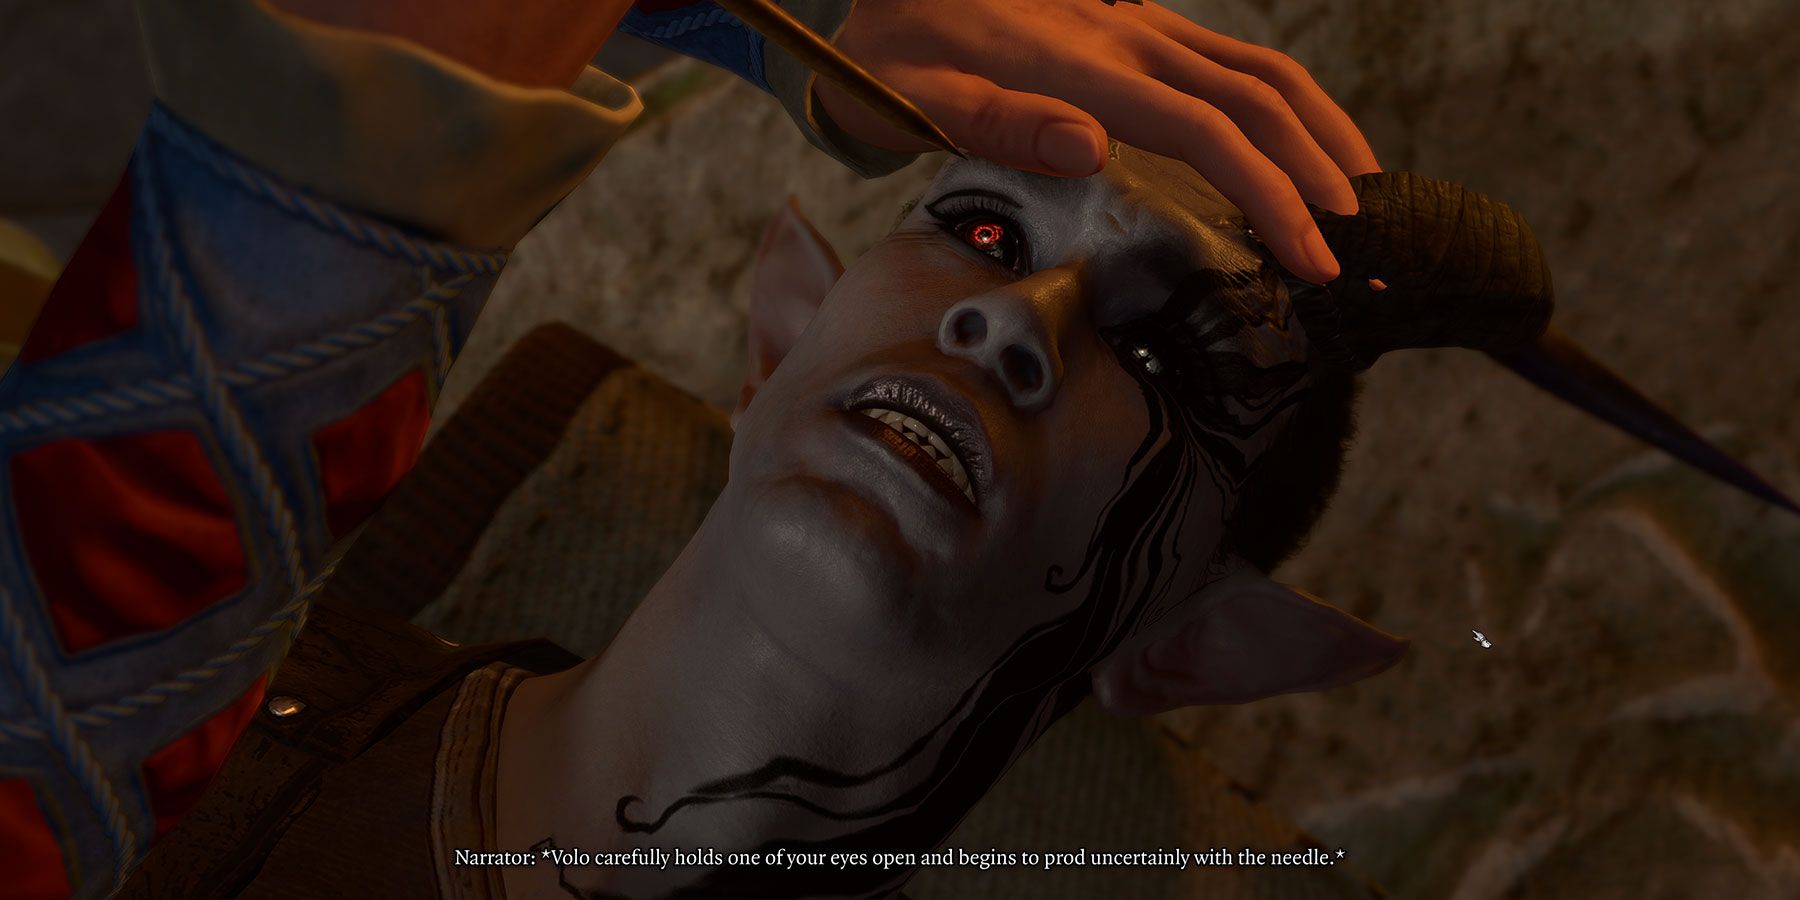 Allowing Volo to remove the player's eye in Baldur's Gate 3.